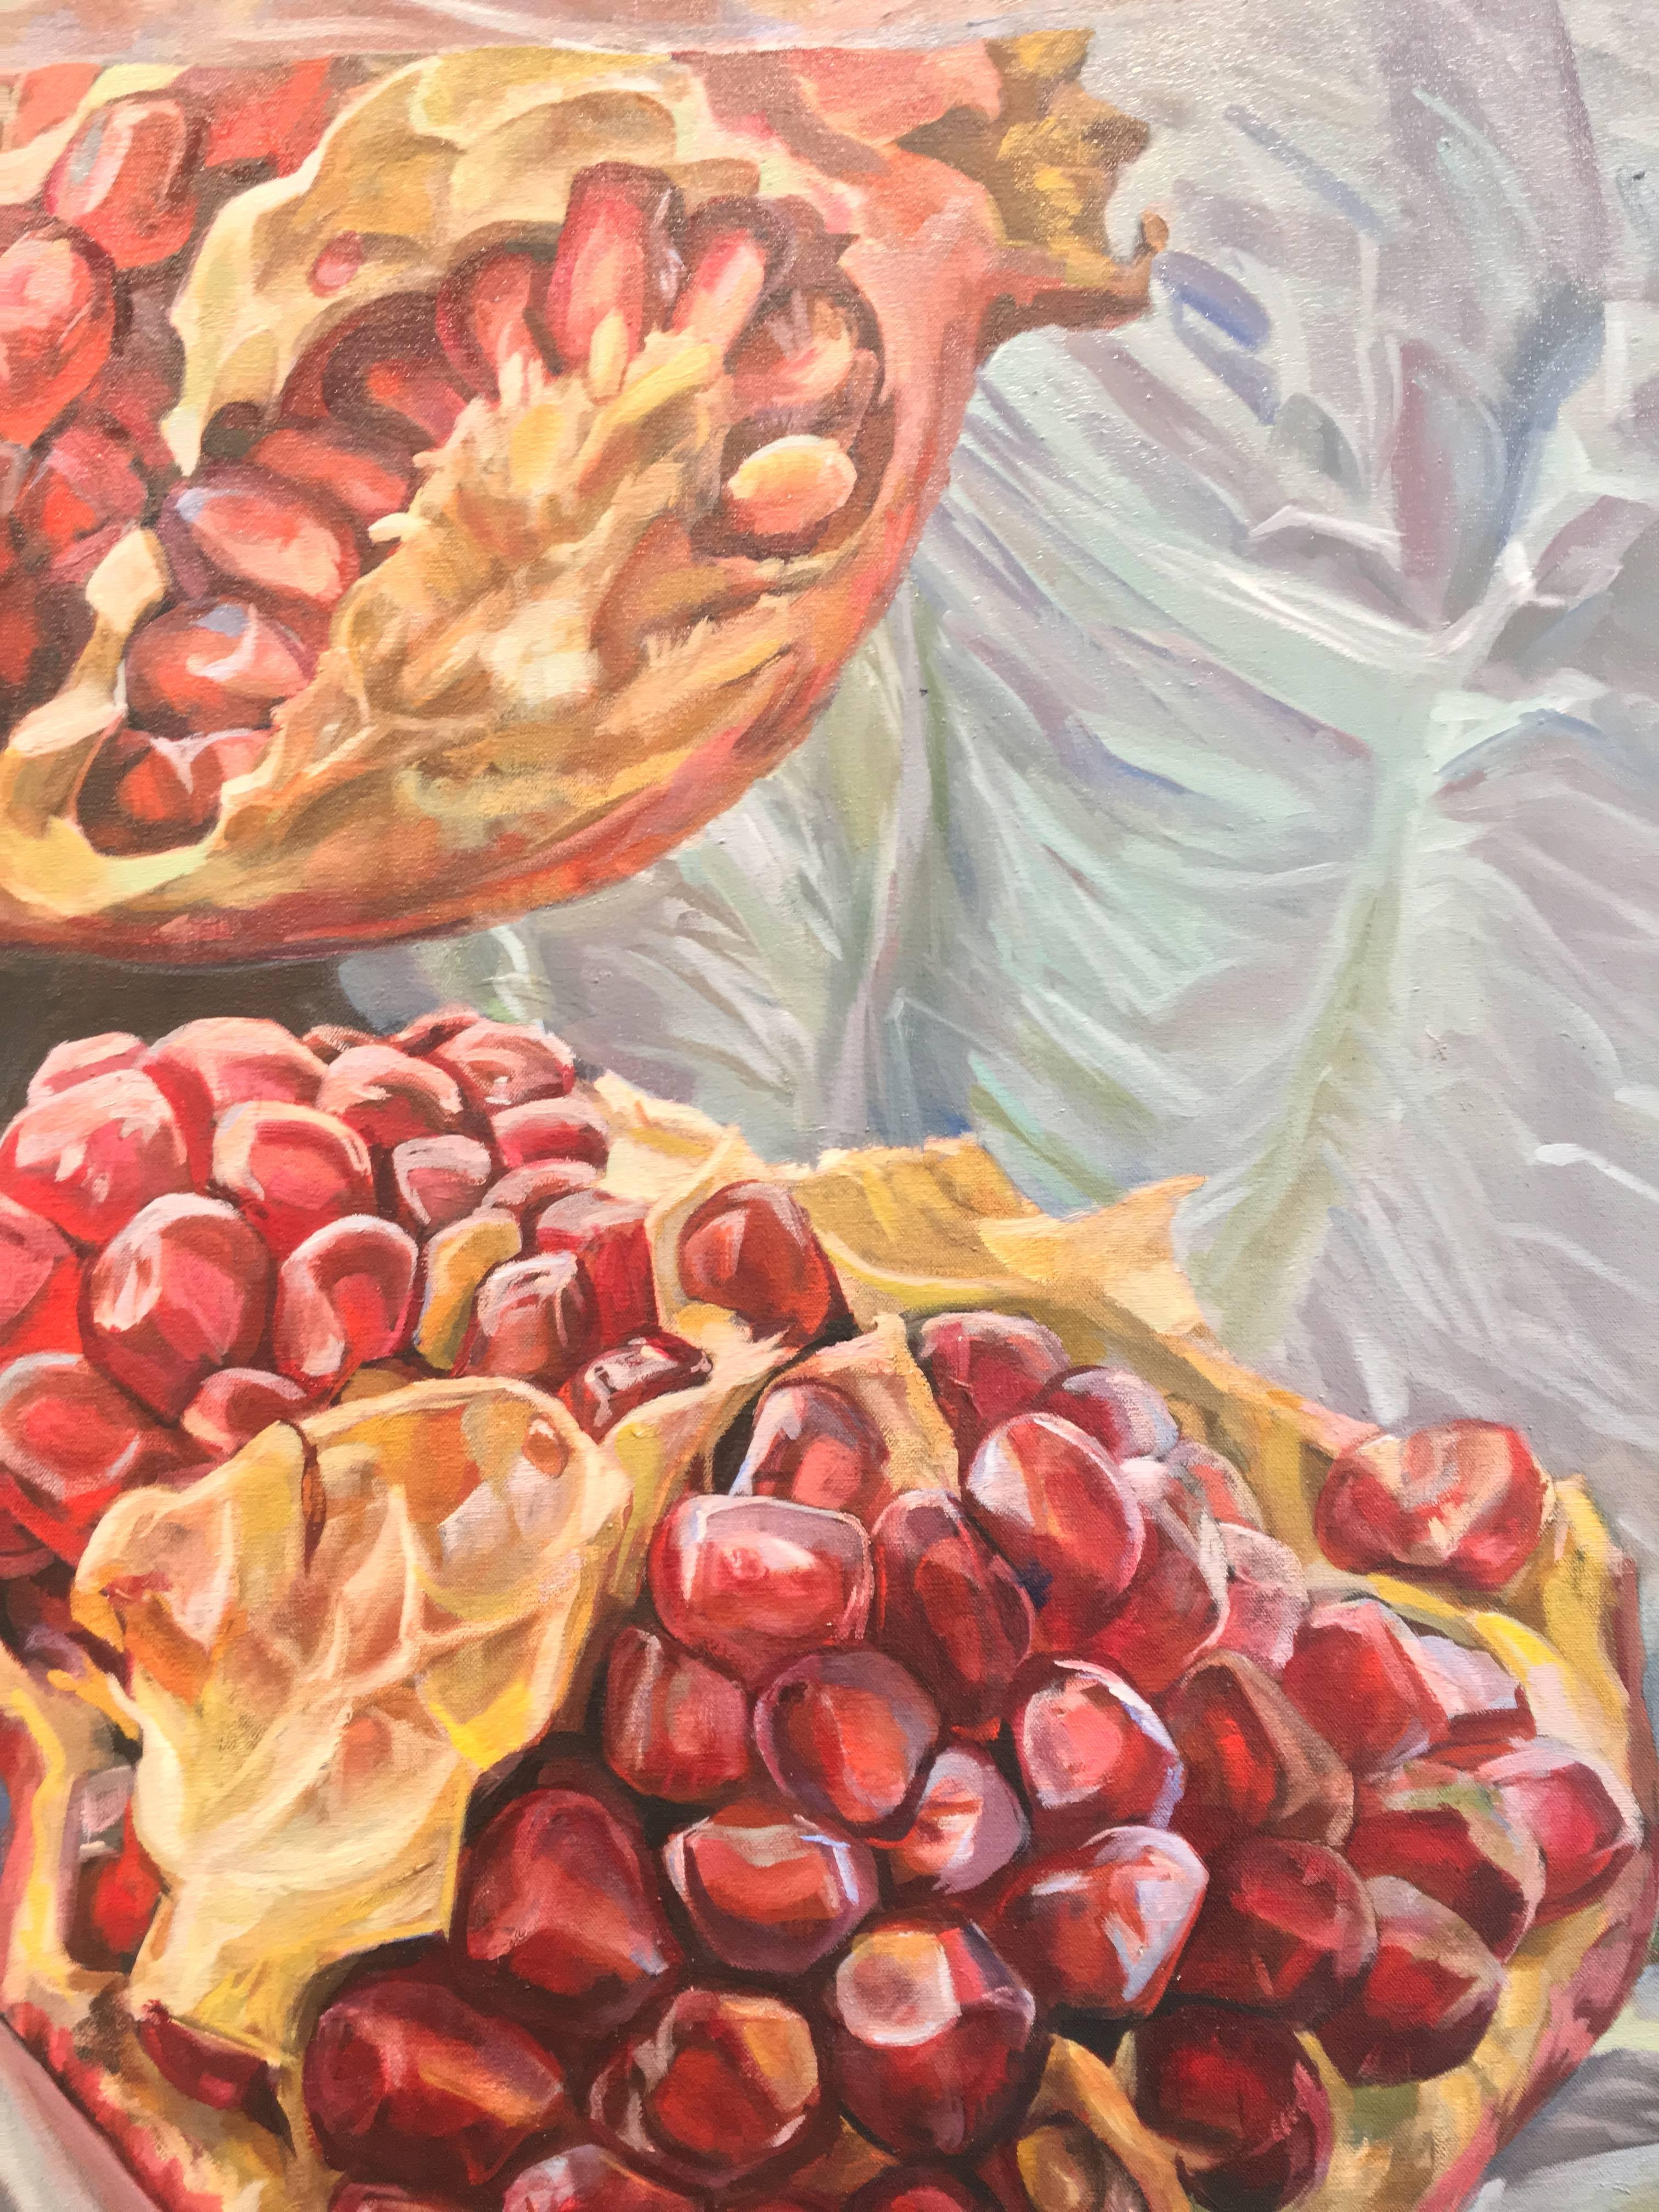 In this large, horizontal oil painting on canvas, bright burgundy and crimson red seeds spill out from inside an opened pomegranate, its sensuous form spread across a three panel composition. The rich, vibrant shades of rouge within the fruit are